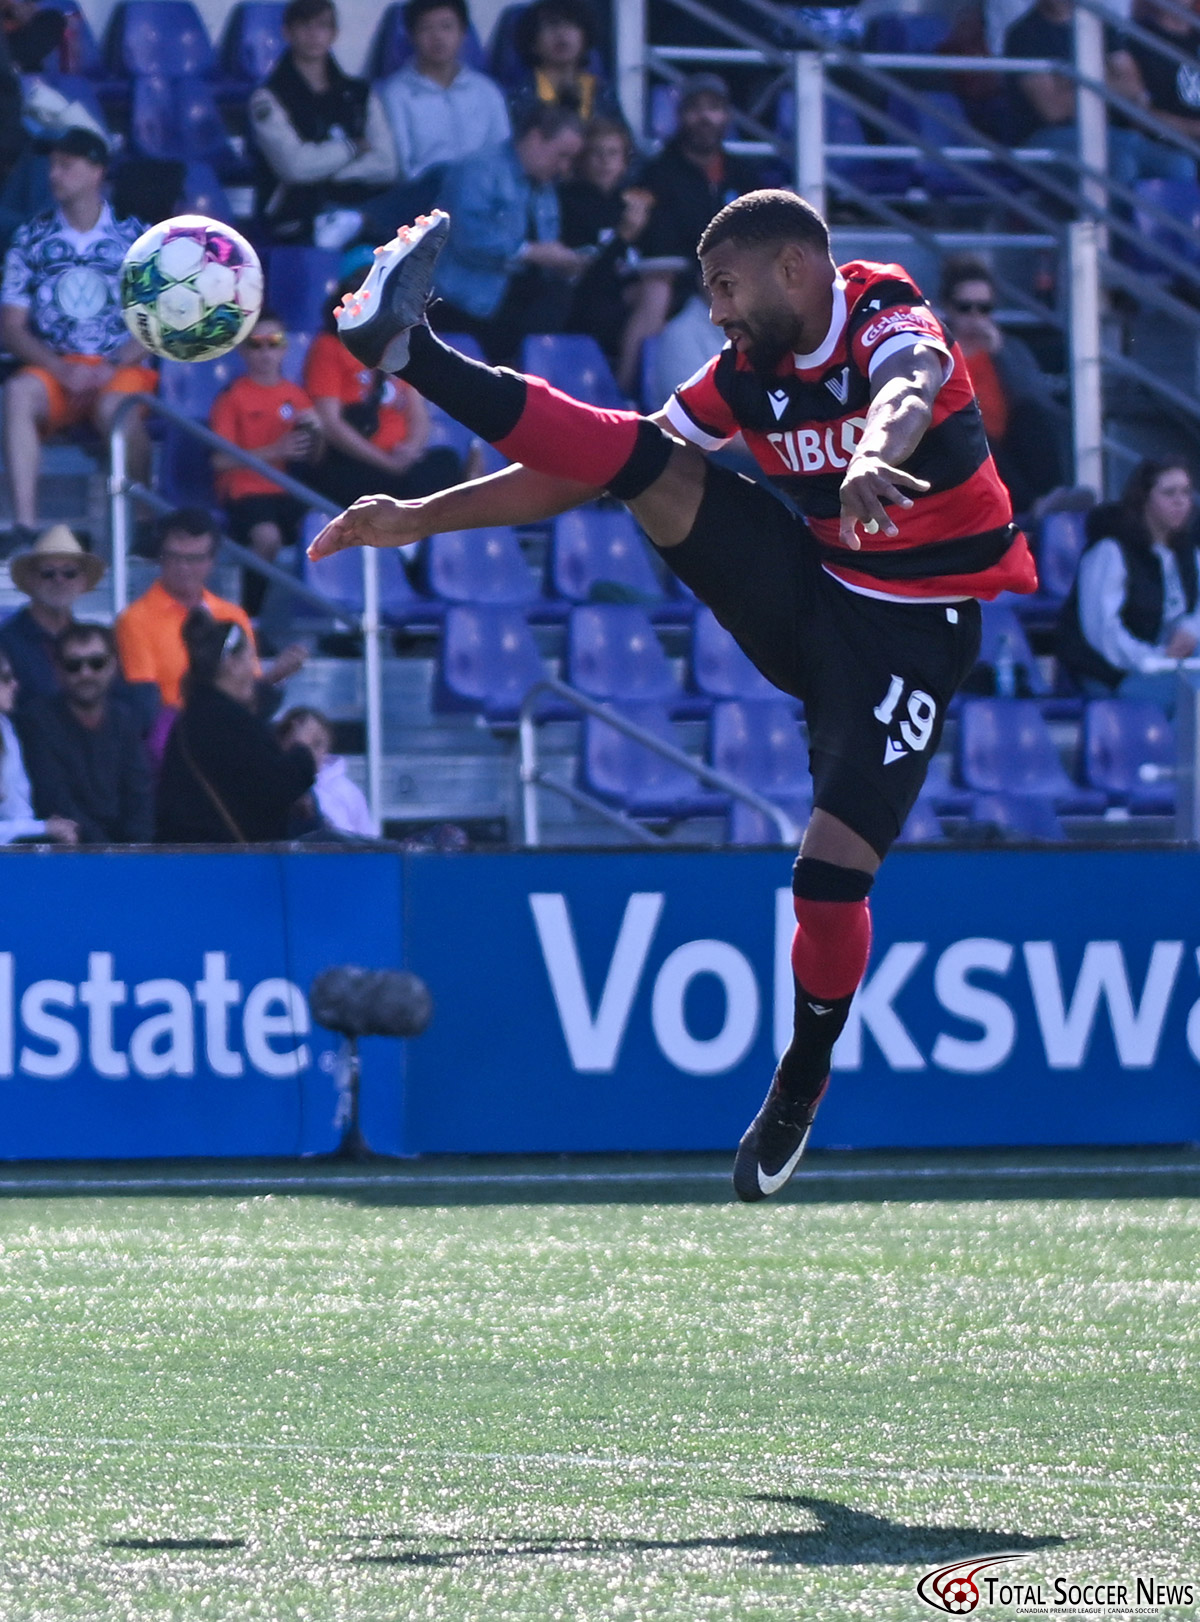 Photo gallery: Vancouver FC beat Pacific FC – Total Soccer News